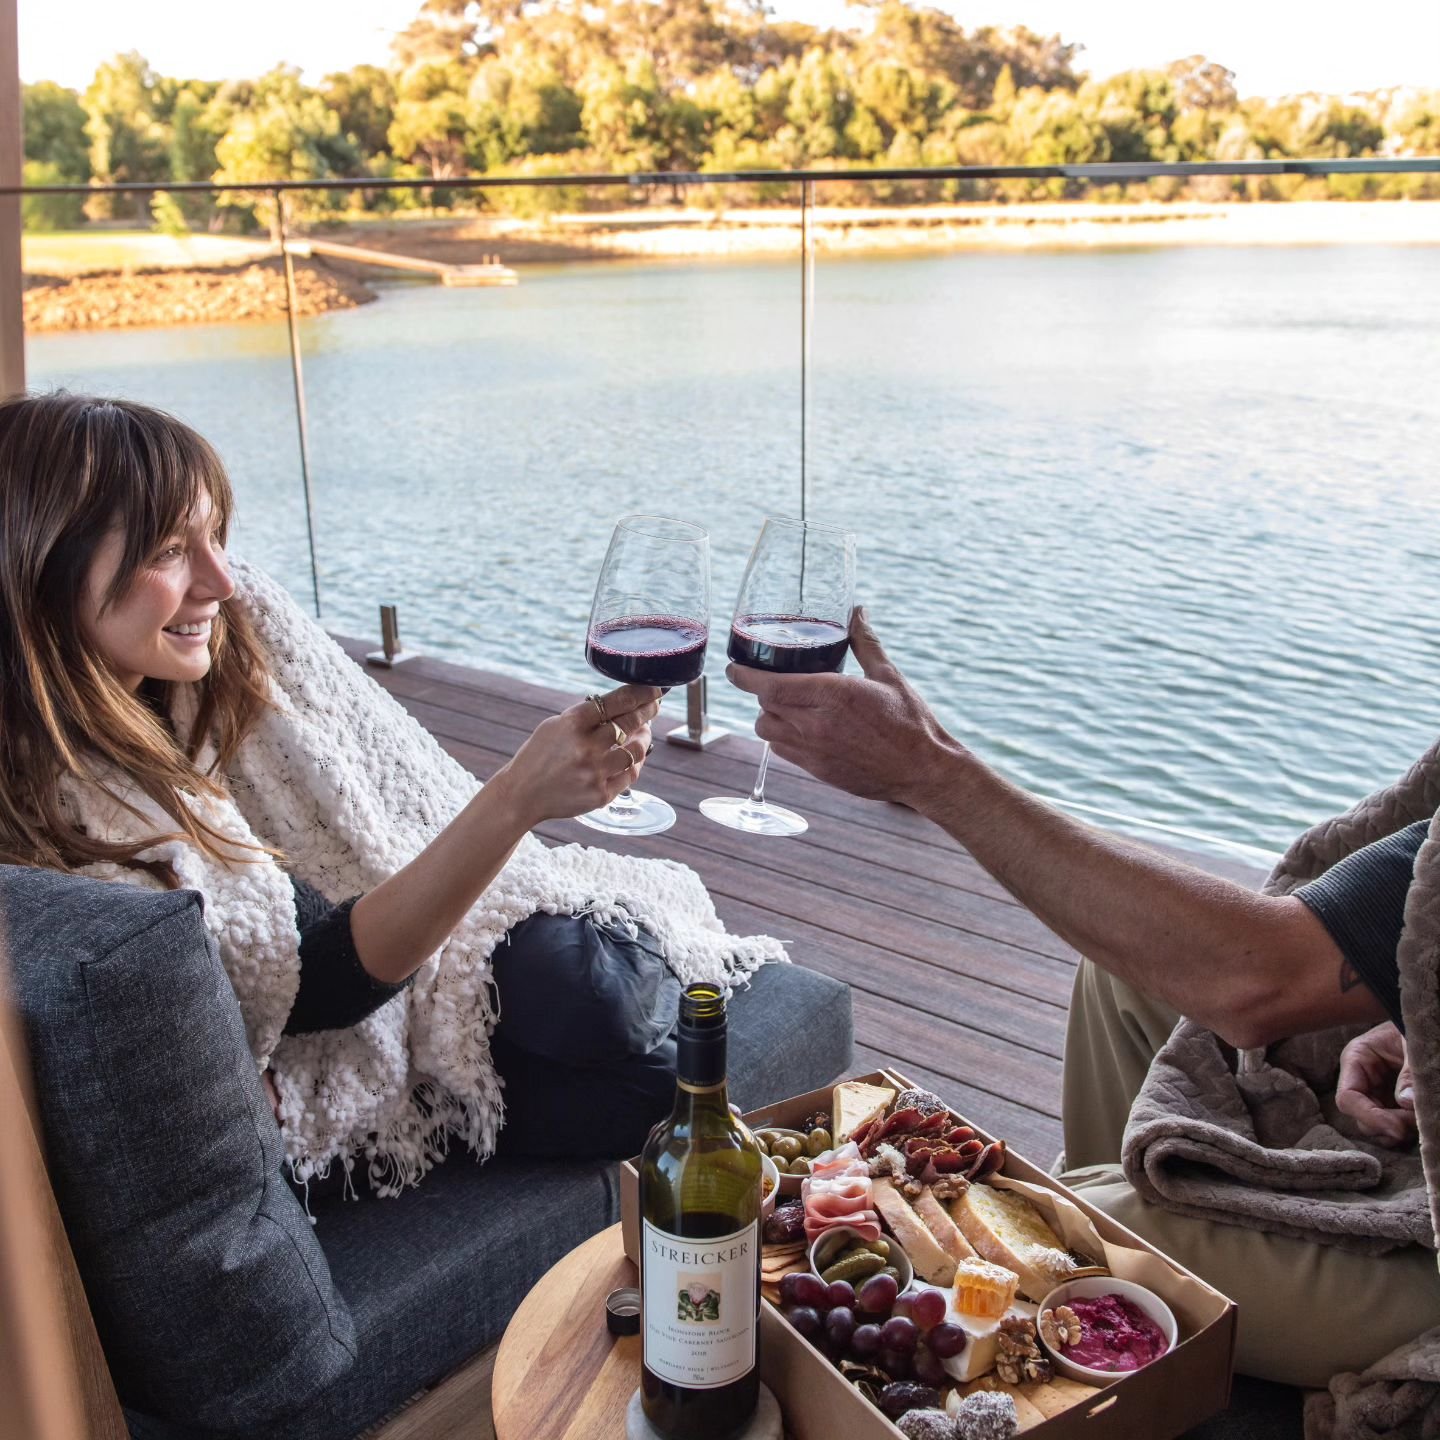 Combine luxury, nature and world-class wineries for your next romantic getaway in Margaret River. 

Guests at Edge Luxury Villas will spend much of their time relaxing on their expansive over-the-water balcony, listening and watching kangaroo and bir